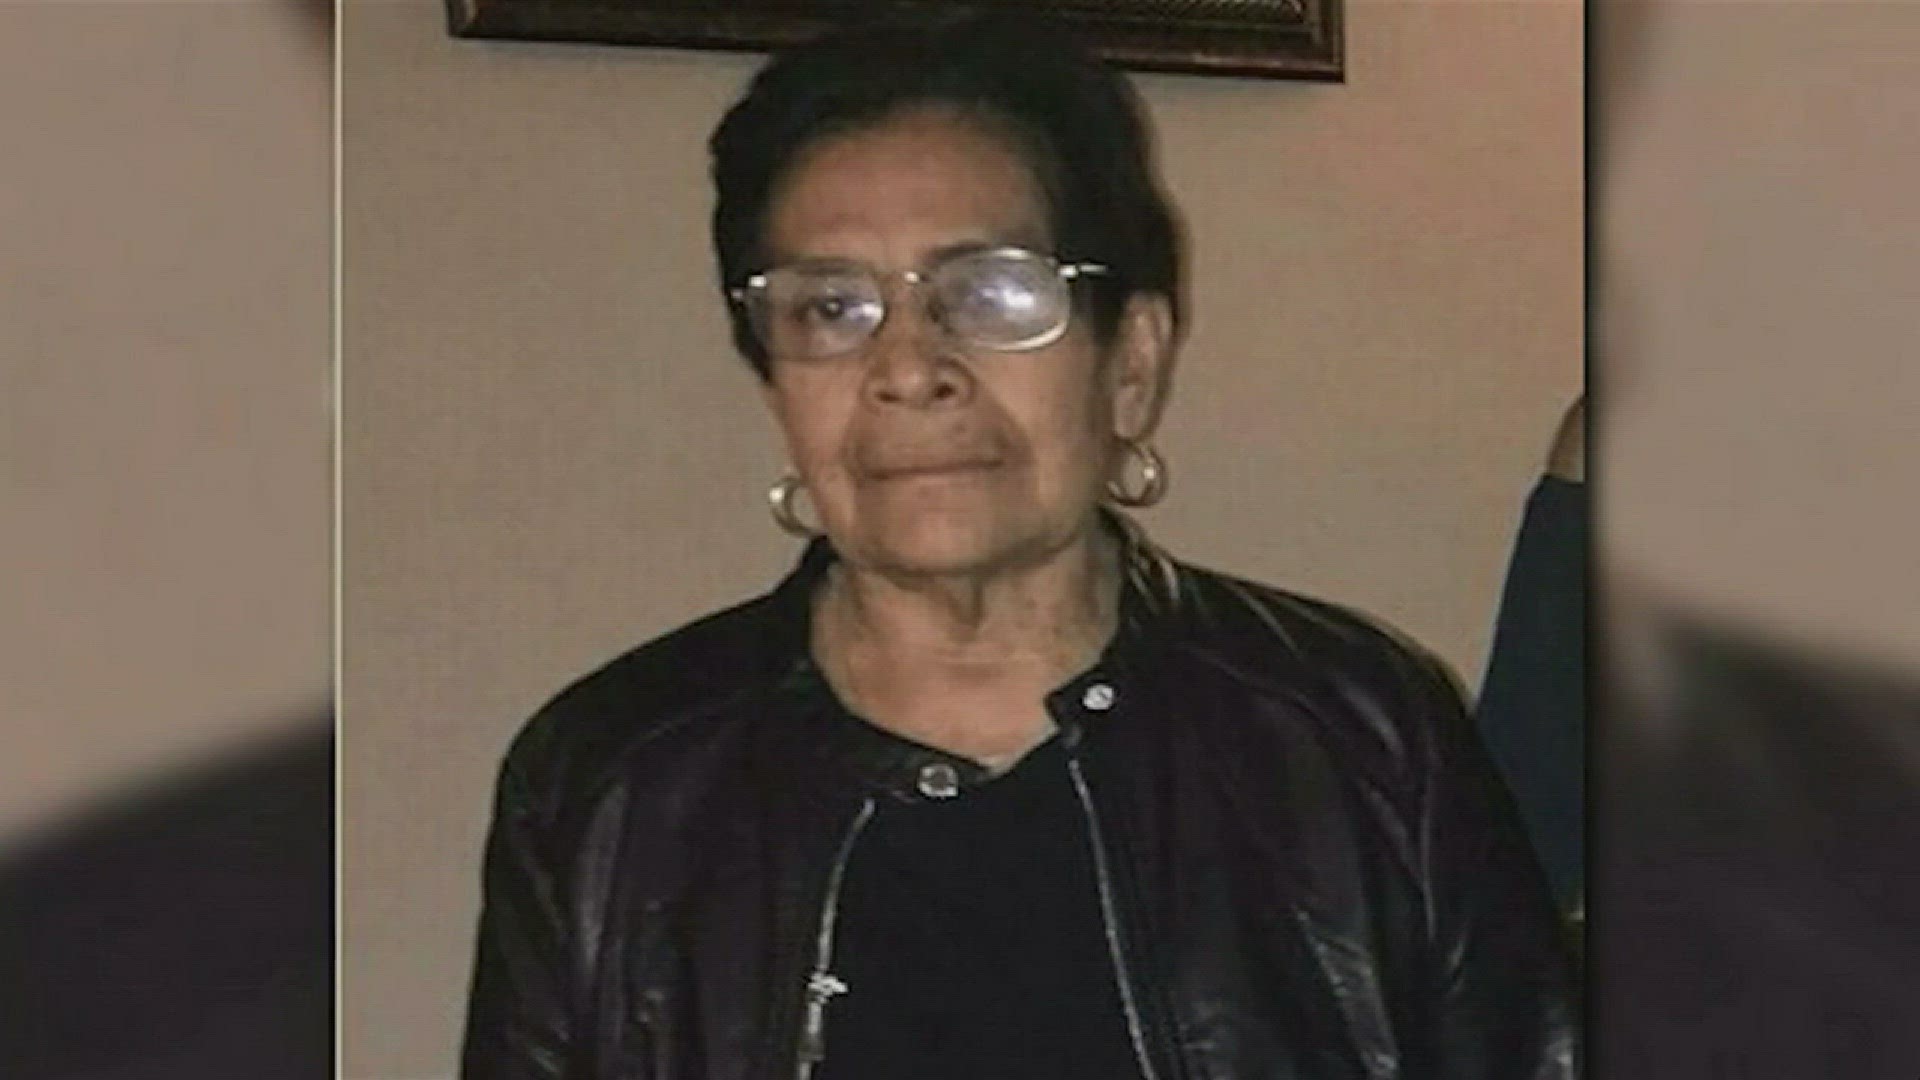 Nearly six months have passed since the disappearance of 70-year-old Maria Jesus Llamas. She was last seen November 20th leaving the Poteet Flea Market.